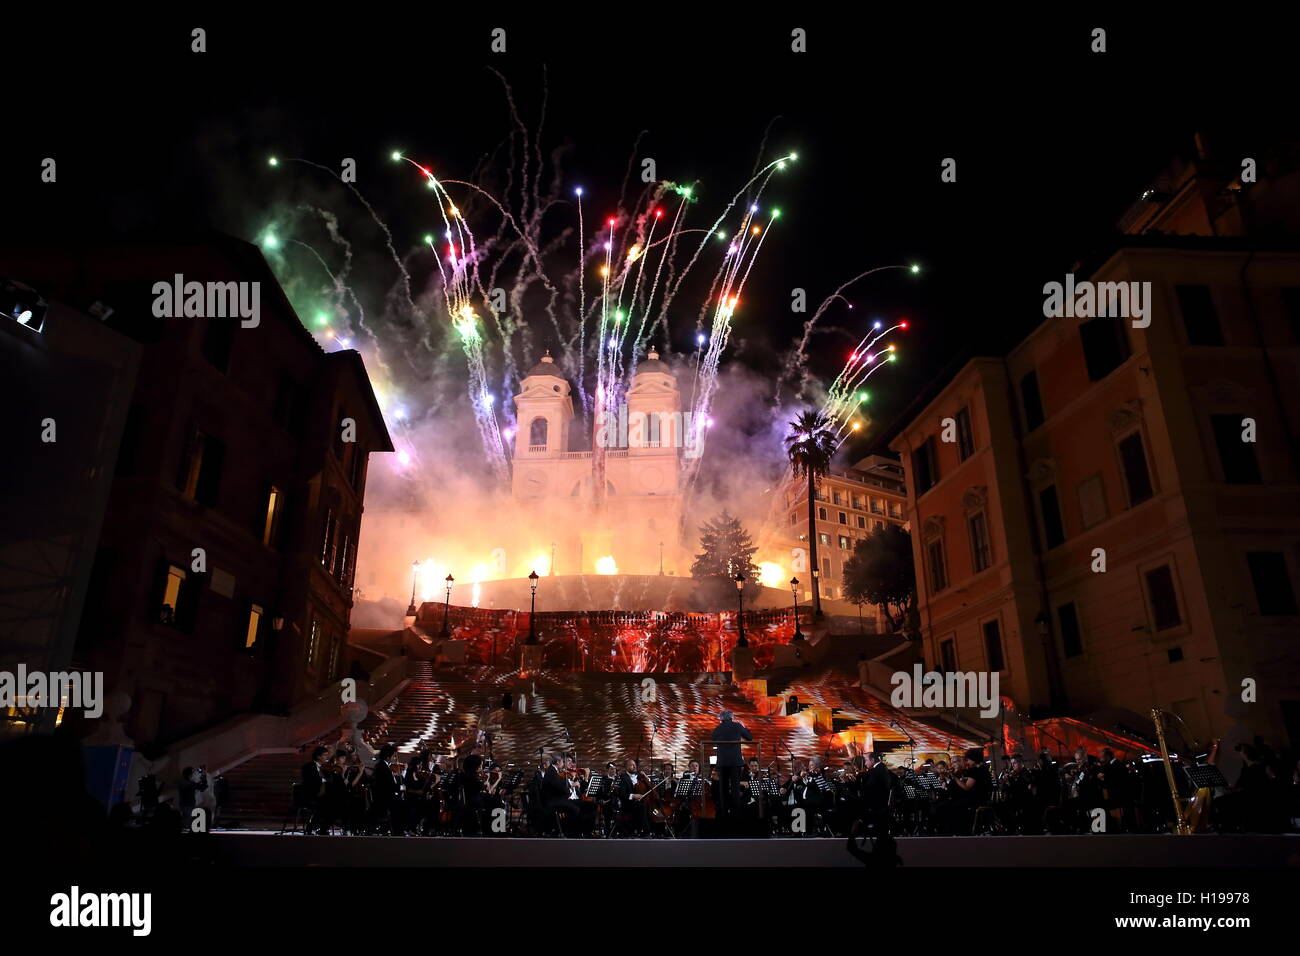 Roma, Italy. 22nd Sep, 2016. Reopening Spanish Steps after restoration work, with a show and a concert by the National Academy of Santa Cecilia conducted by Antonio Pappano, and the fireworks on the Spanish Steps © Matteo Nardone/Pacific Press/Alamy Live News Stock Photo